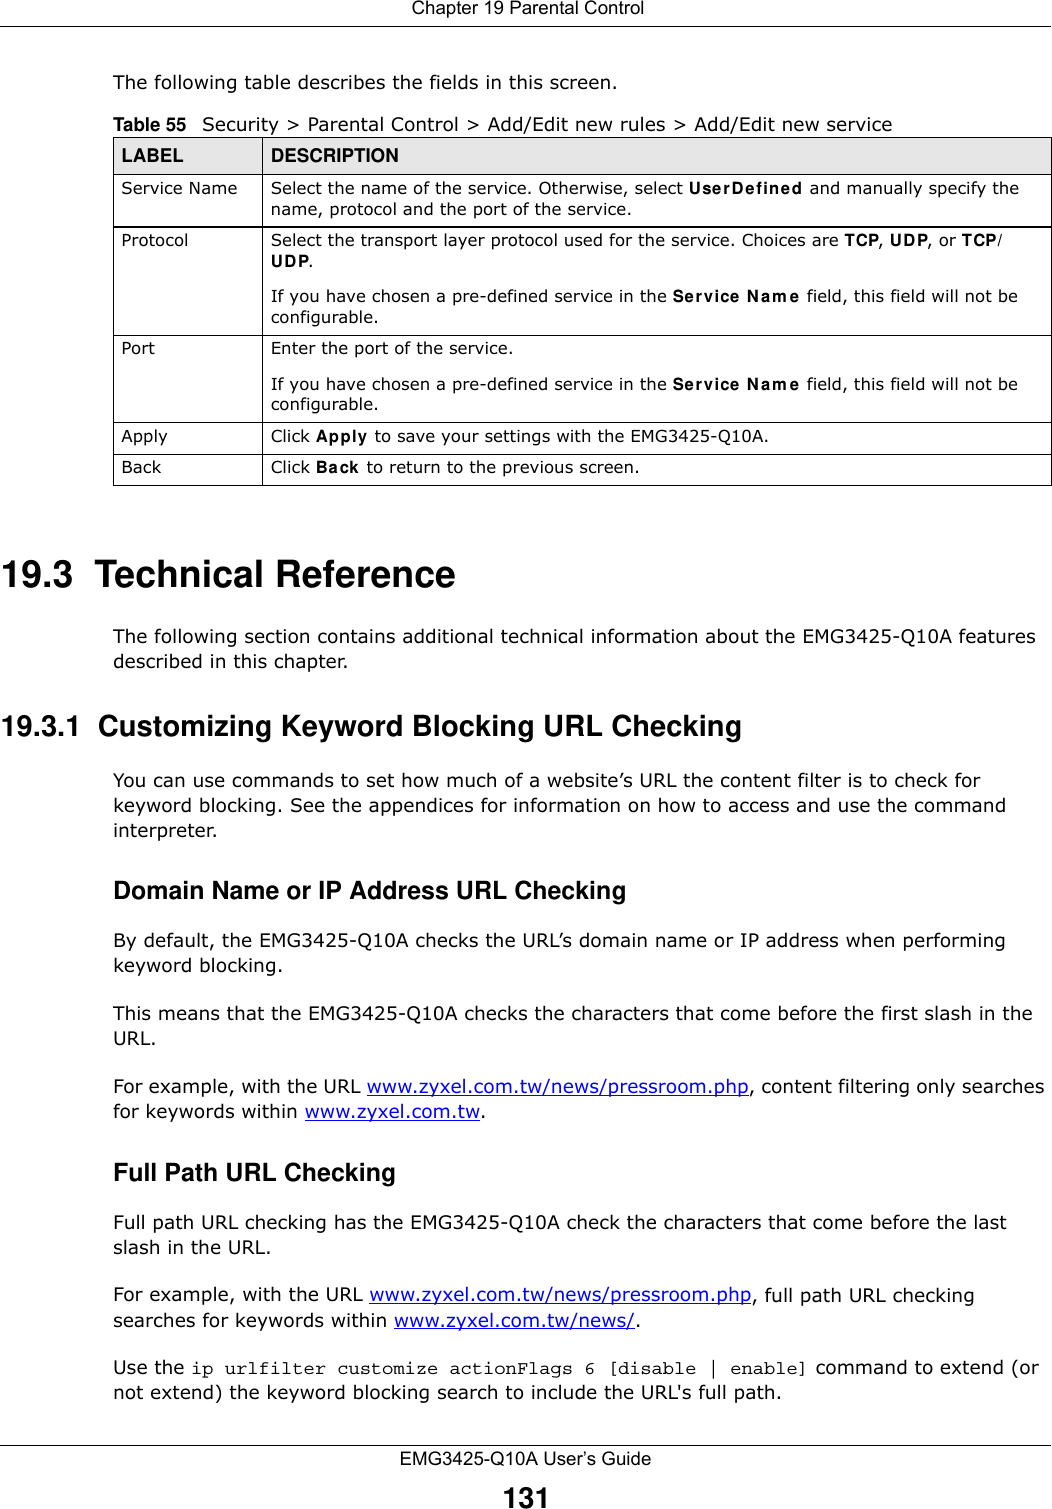  Chapter 19 Parental ControlEMG3425-Q10A User’s Guide131The following table describes the fields in this screen. 19.3  Technical ReferenceThe following section contains additional technical information about the EMG3425-Q10A features described in this chapter.19.3.1  Customizing Keyword Blocking URL CheckingYou can use commands to set how much of a website’s URL the content filter is to check for keyword blocking. See the appendices for information on how to access and use the command interpreter.Domain Name or IP Address URL CheckingBy default, the EMG3425-Q10A checks the URL’s domain name or IP address when performing keyword blocking.This means that the EMG3425-Q10A checks the characters that come before the first slash in the URL.For example, with the URL www.zyxel.com.tw/news/pressroom.php, content filtering only searches for keywords within www.zyxel.com.tw.Full Path URL CheckingFull path URL checking has the EMG3425-Q10A check the characters that come before the last slash in the URL.For example, with the URL www.zyxel.com.tw/news/pressroom.php, full path URL checking searches for keywords within www.zyxel.com.tw/news/.Use the ip urlfilter customize actionFlags 6 [disable | enable] command to extend (or not extend) the keyword blocking search to include the URL&apos;s full path.Table 55   Security &gt; Parental Control &gt; Add/Edit new rules &gt; Add/Edit new serviceLABEL DESCRIPTIONService Name Select the name of the service. Otherwise, select Use rDefin ed and manually specify the name, protocol and the port of the service.Protocol Select the transport layer protocol used for the service. Choices are TCP, UDP, or TCP/UDP. If you have chosen a pre-defined service in the Service Nam e field, this field will not be configurable.Port Enter the port of the service. If you have chosen a pre-defined service in the Service Nam e field, this field will not be configurable.Apply Click Apply to save your settings with the EMG3425-Q10A.Back Click Ba ck to return to the previous screen.